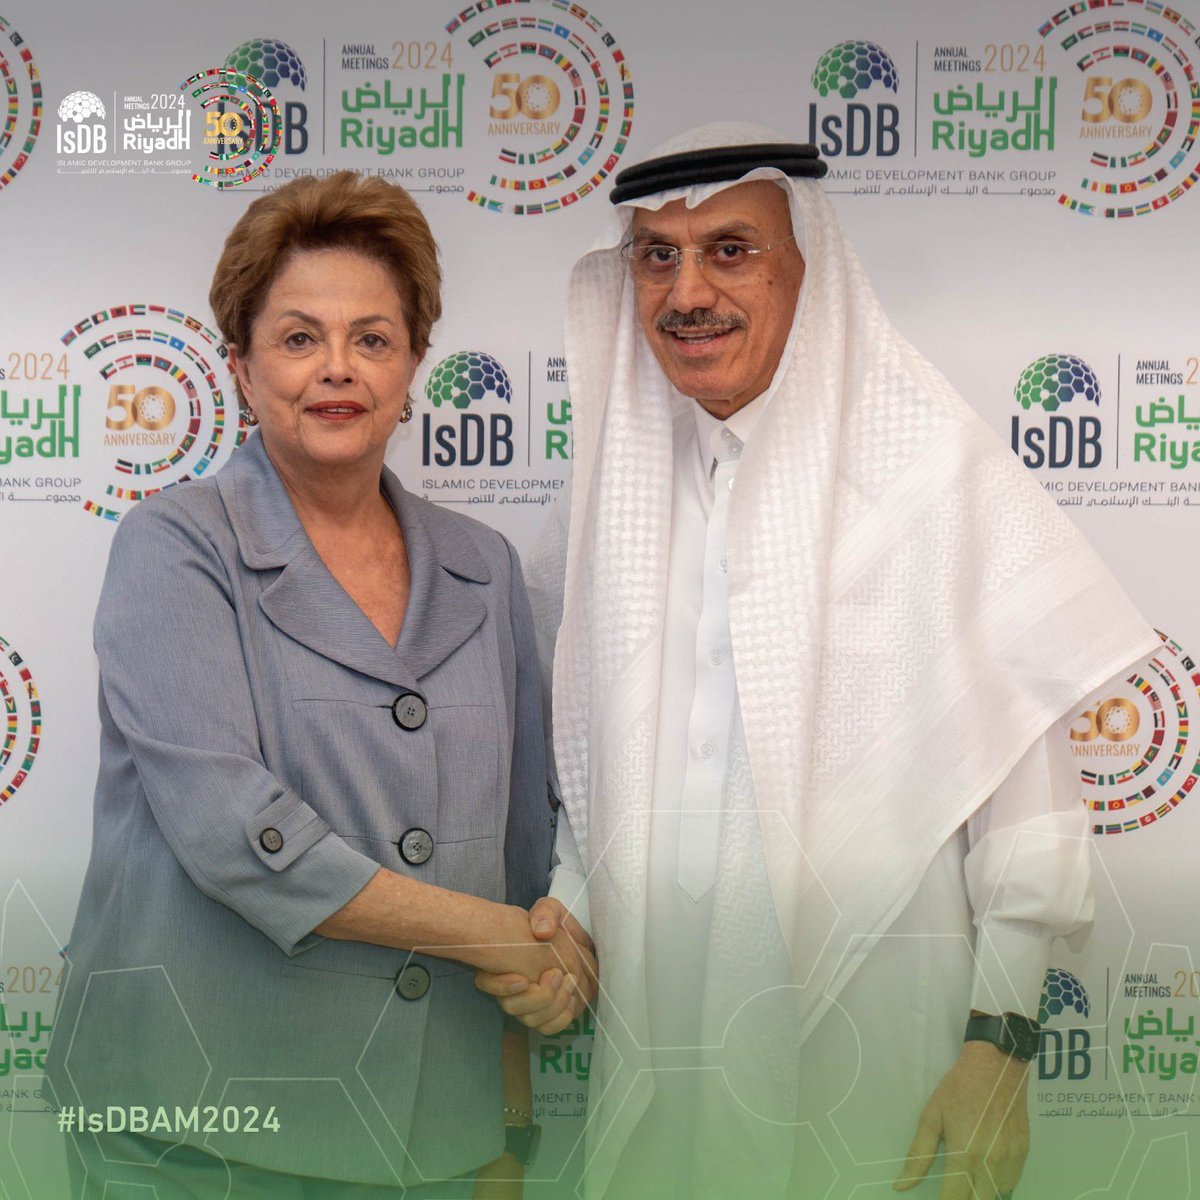 #Riyadh: H.E. Dr. Muhammad Al Jasser, #IsDB Group Chairman, met with H.E Dilma Rousseff @dilmabr, President of the New Development Bank (NDB) at #IsDBAM24 and Golden jubilee . The two leaders discussed the strengthening of bilateral relations and partnership to better serve…